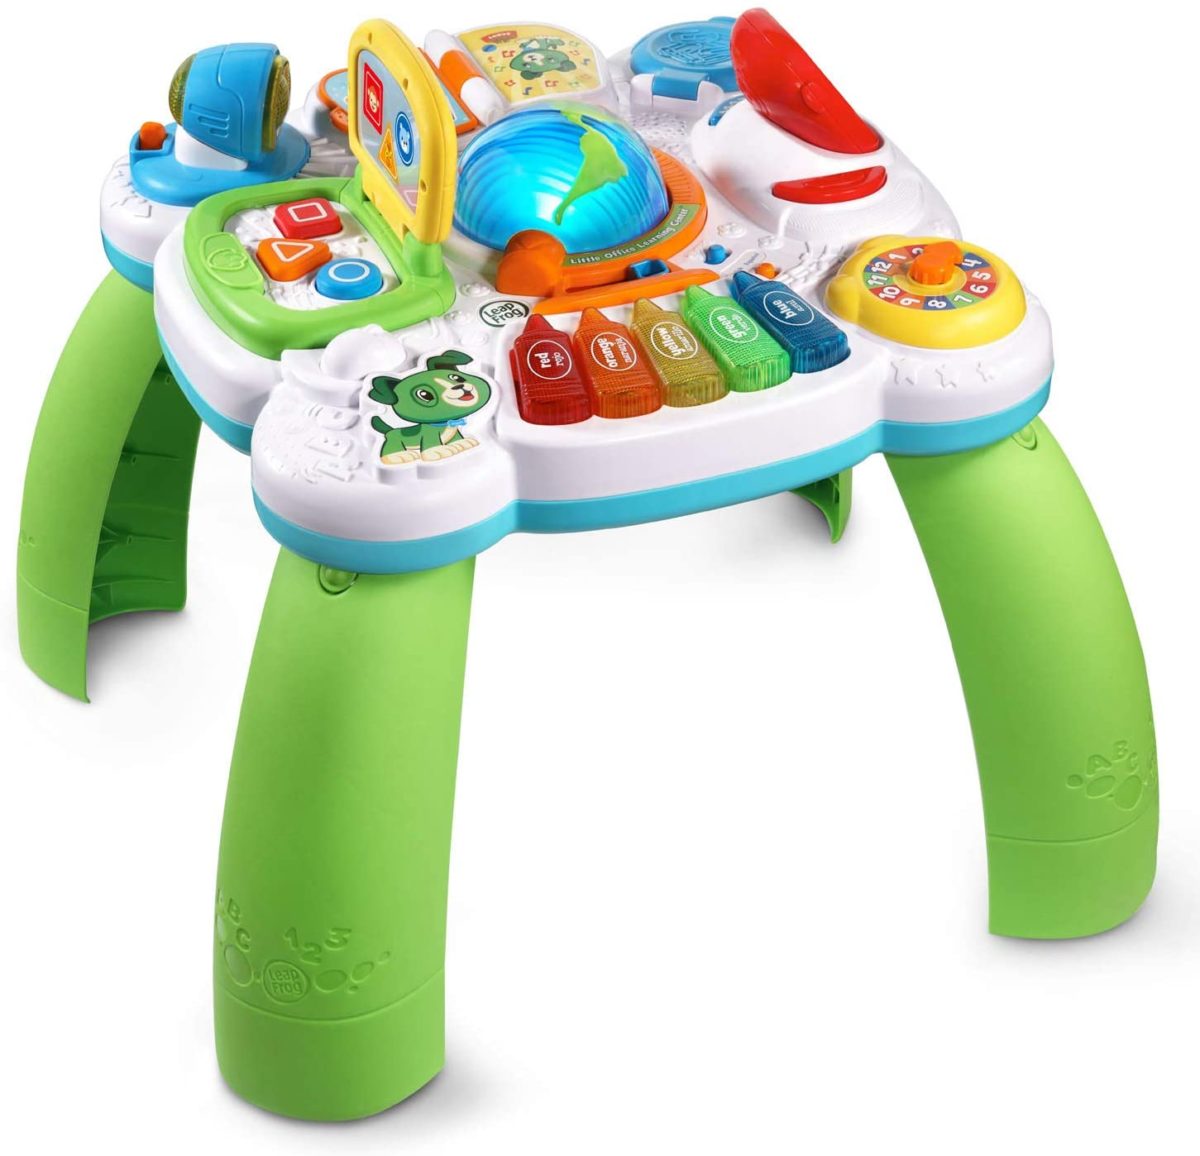 Toys for Babies: Here Are 35 Gifts That Help With a Baby's Early Development | In this list, you will find 35 toys that any baby would love.